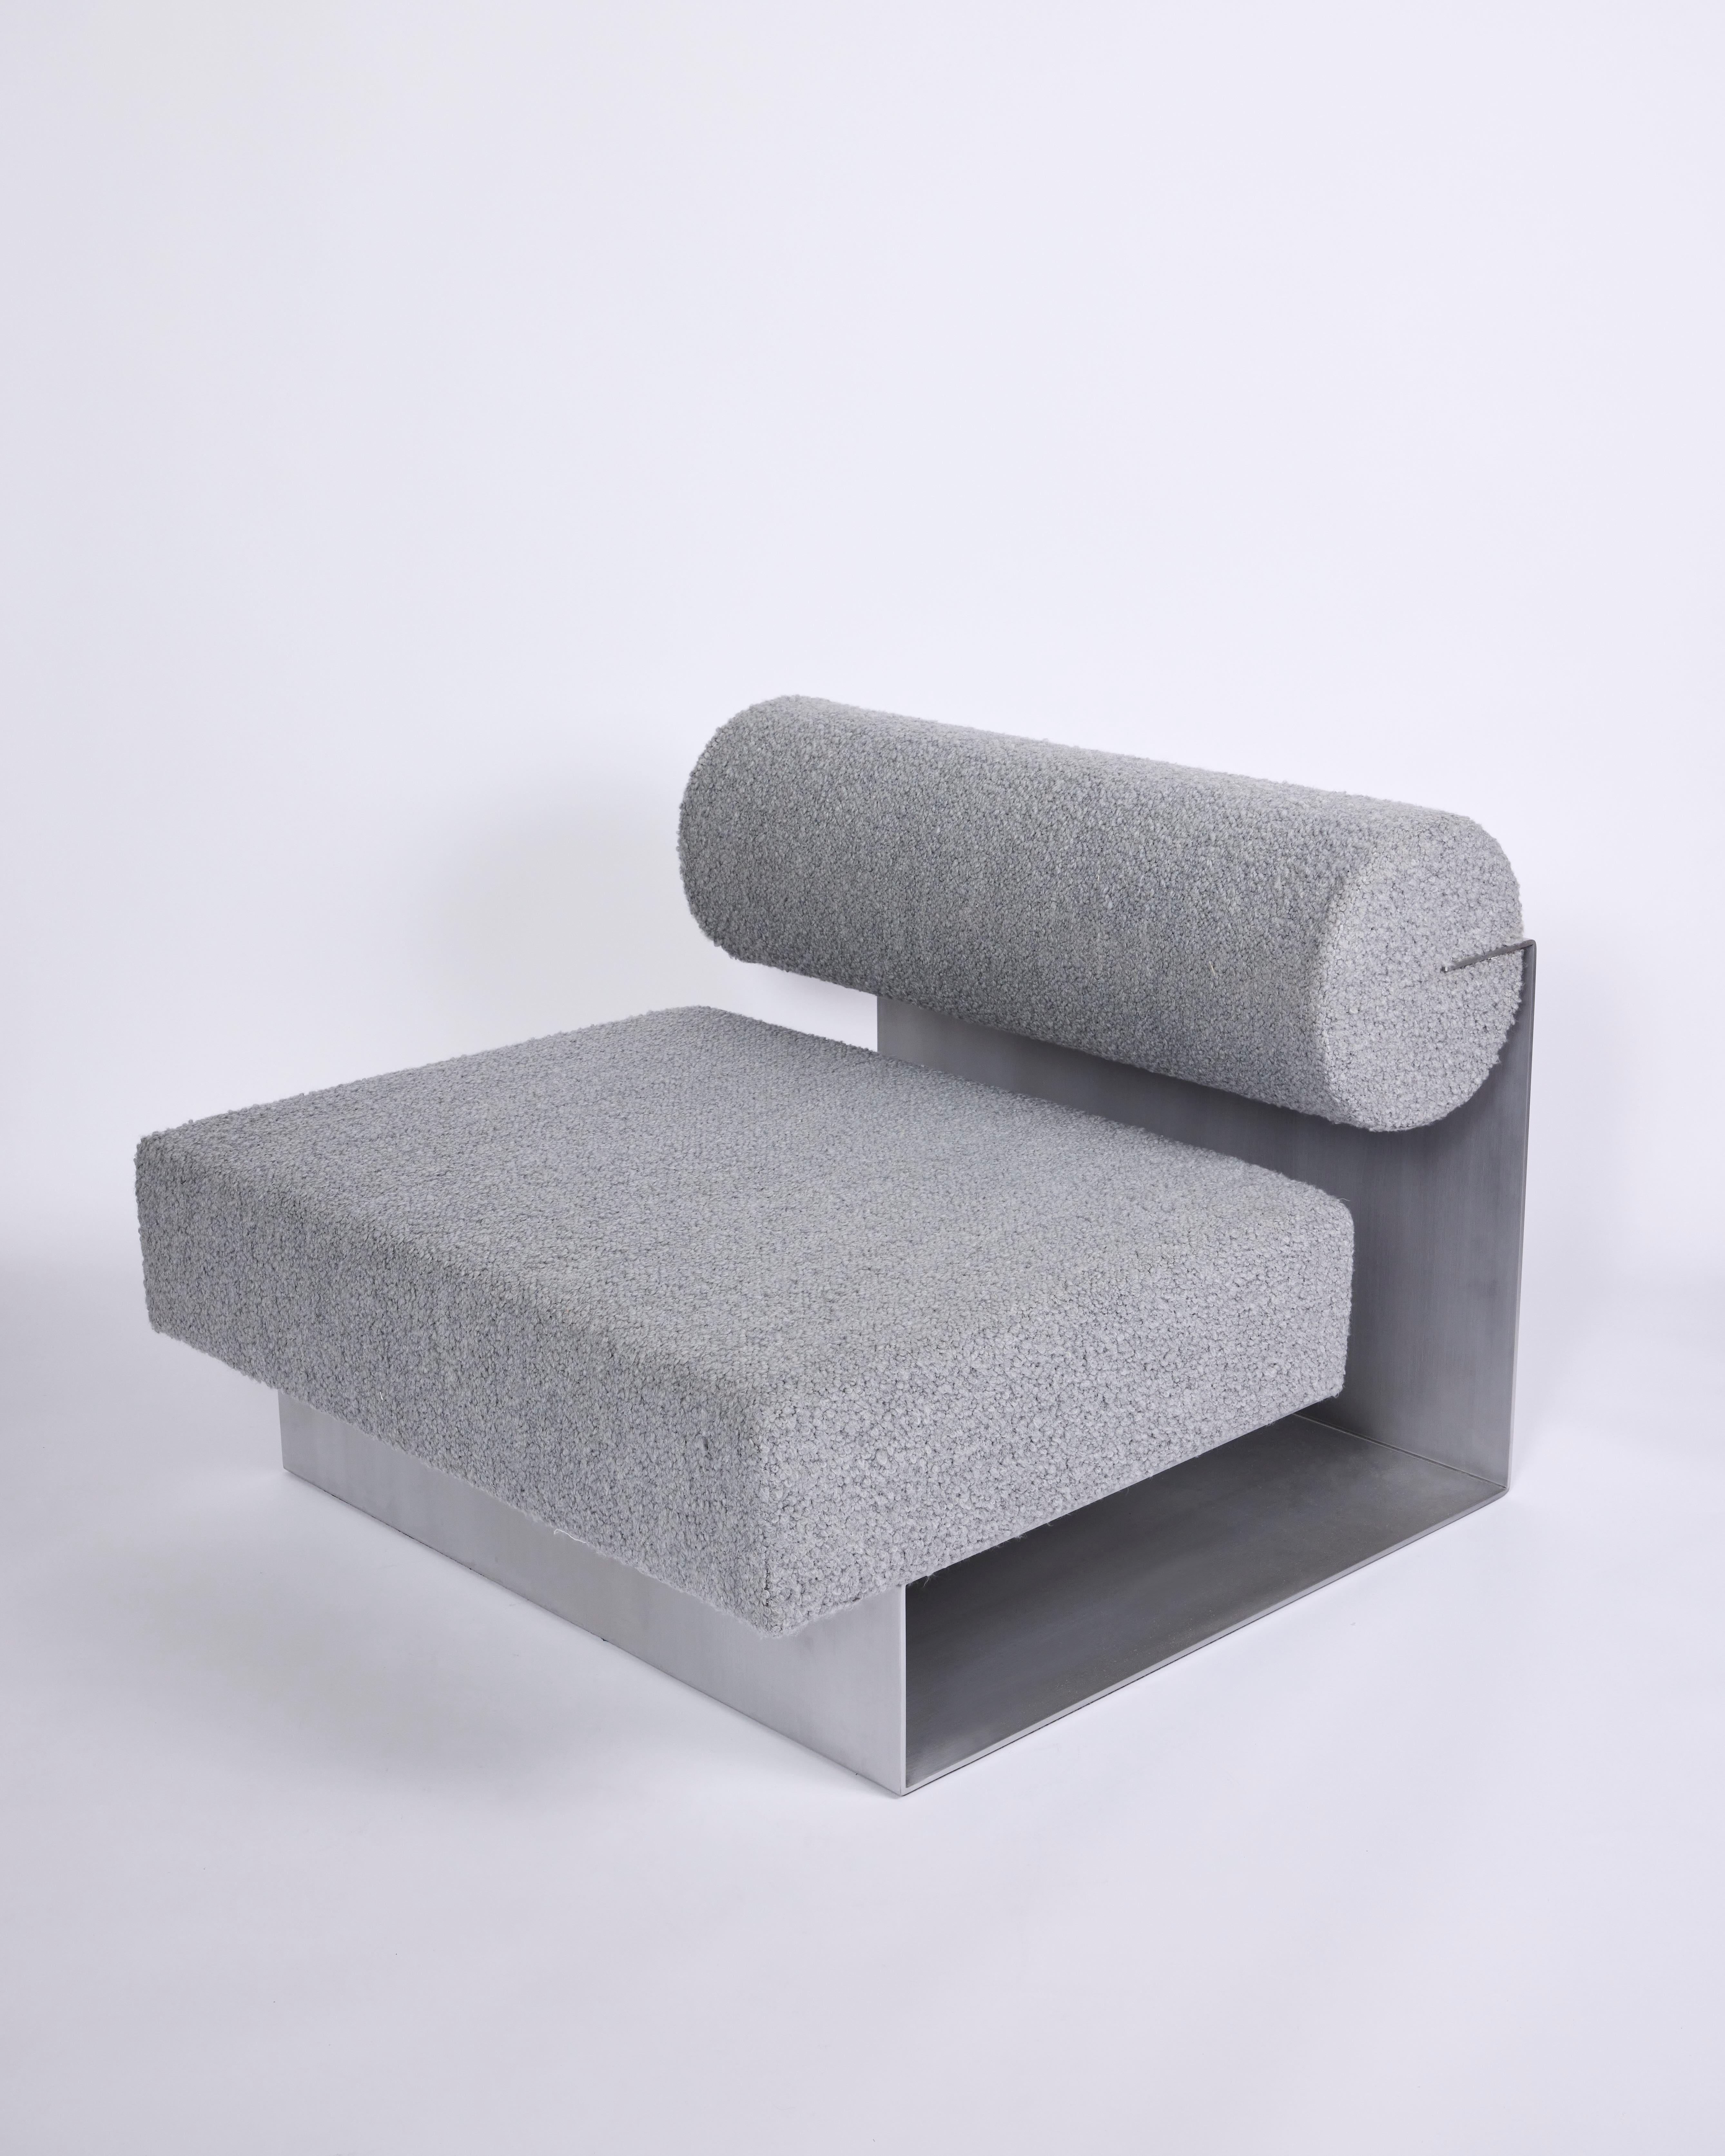 Folds Single Sofa

Materials: aluminum, boucle upholstery
Dimensions: W35 x D38 x H27.5 inches

Folds single sofa explores the dichotomies between hard and soft with thin metal sheets and plush cushions. Pairing back the non-essential elements,